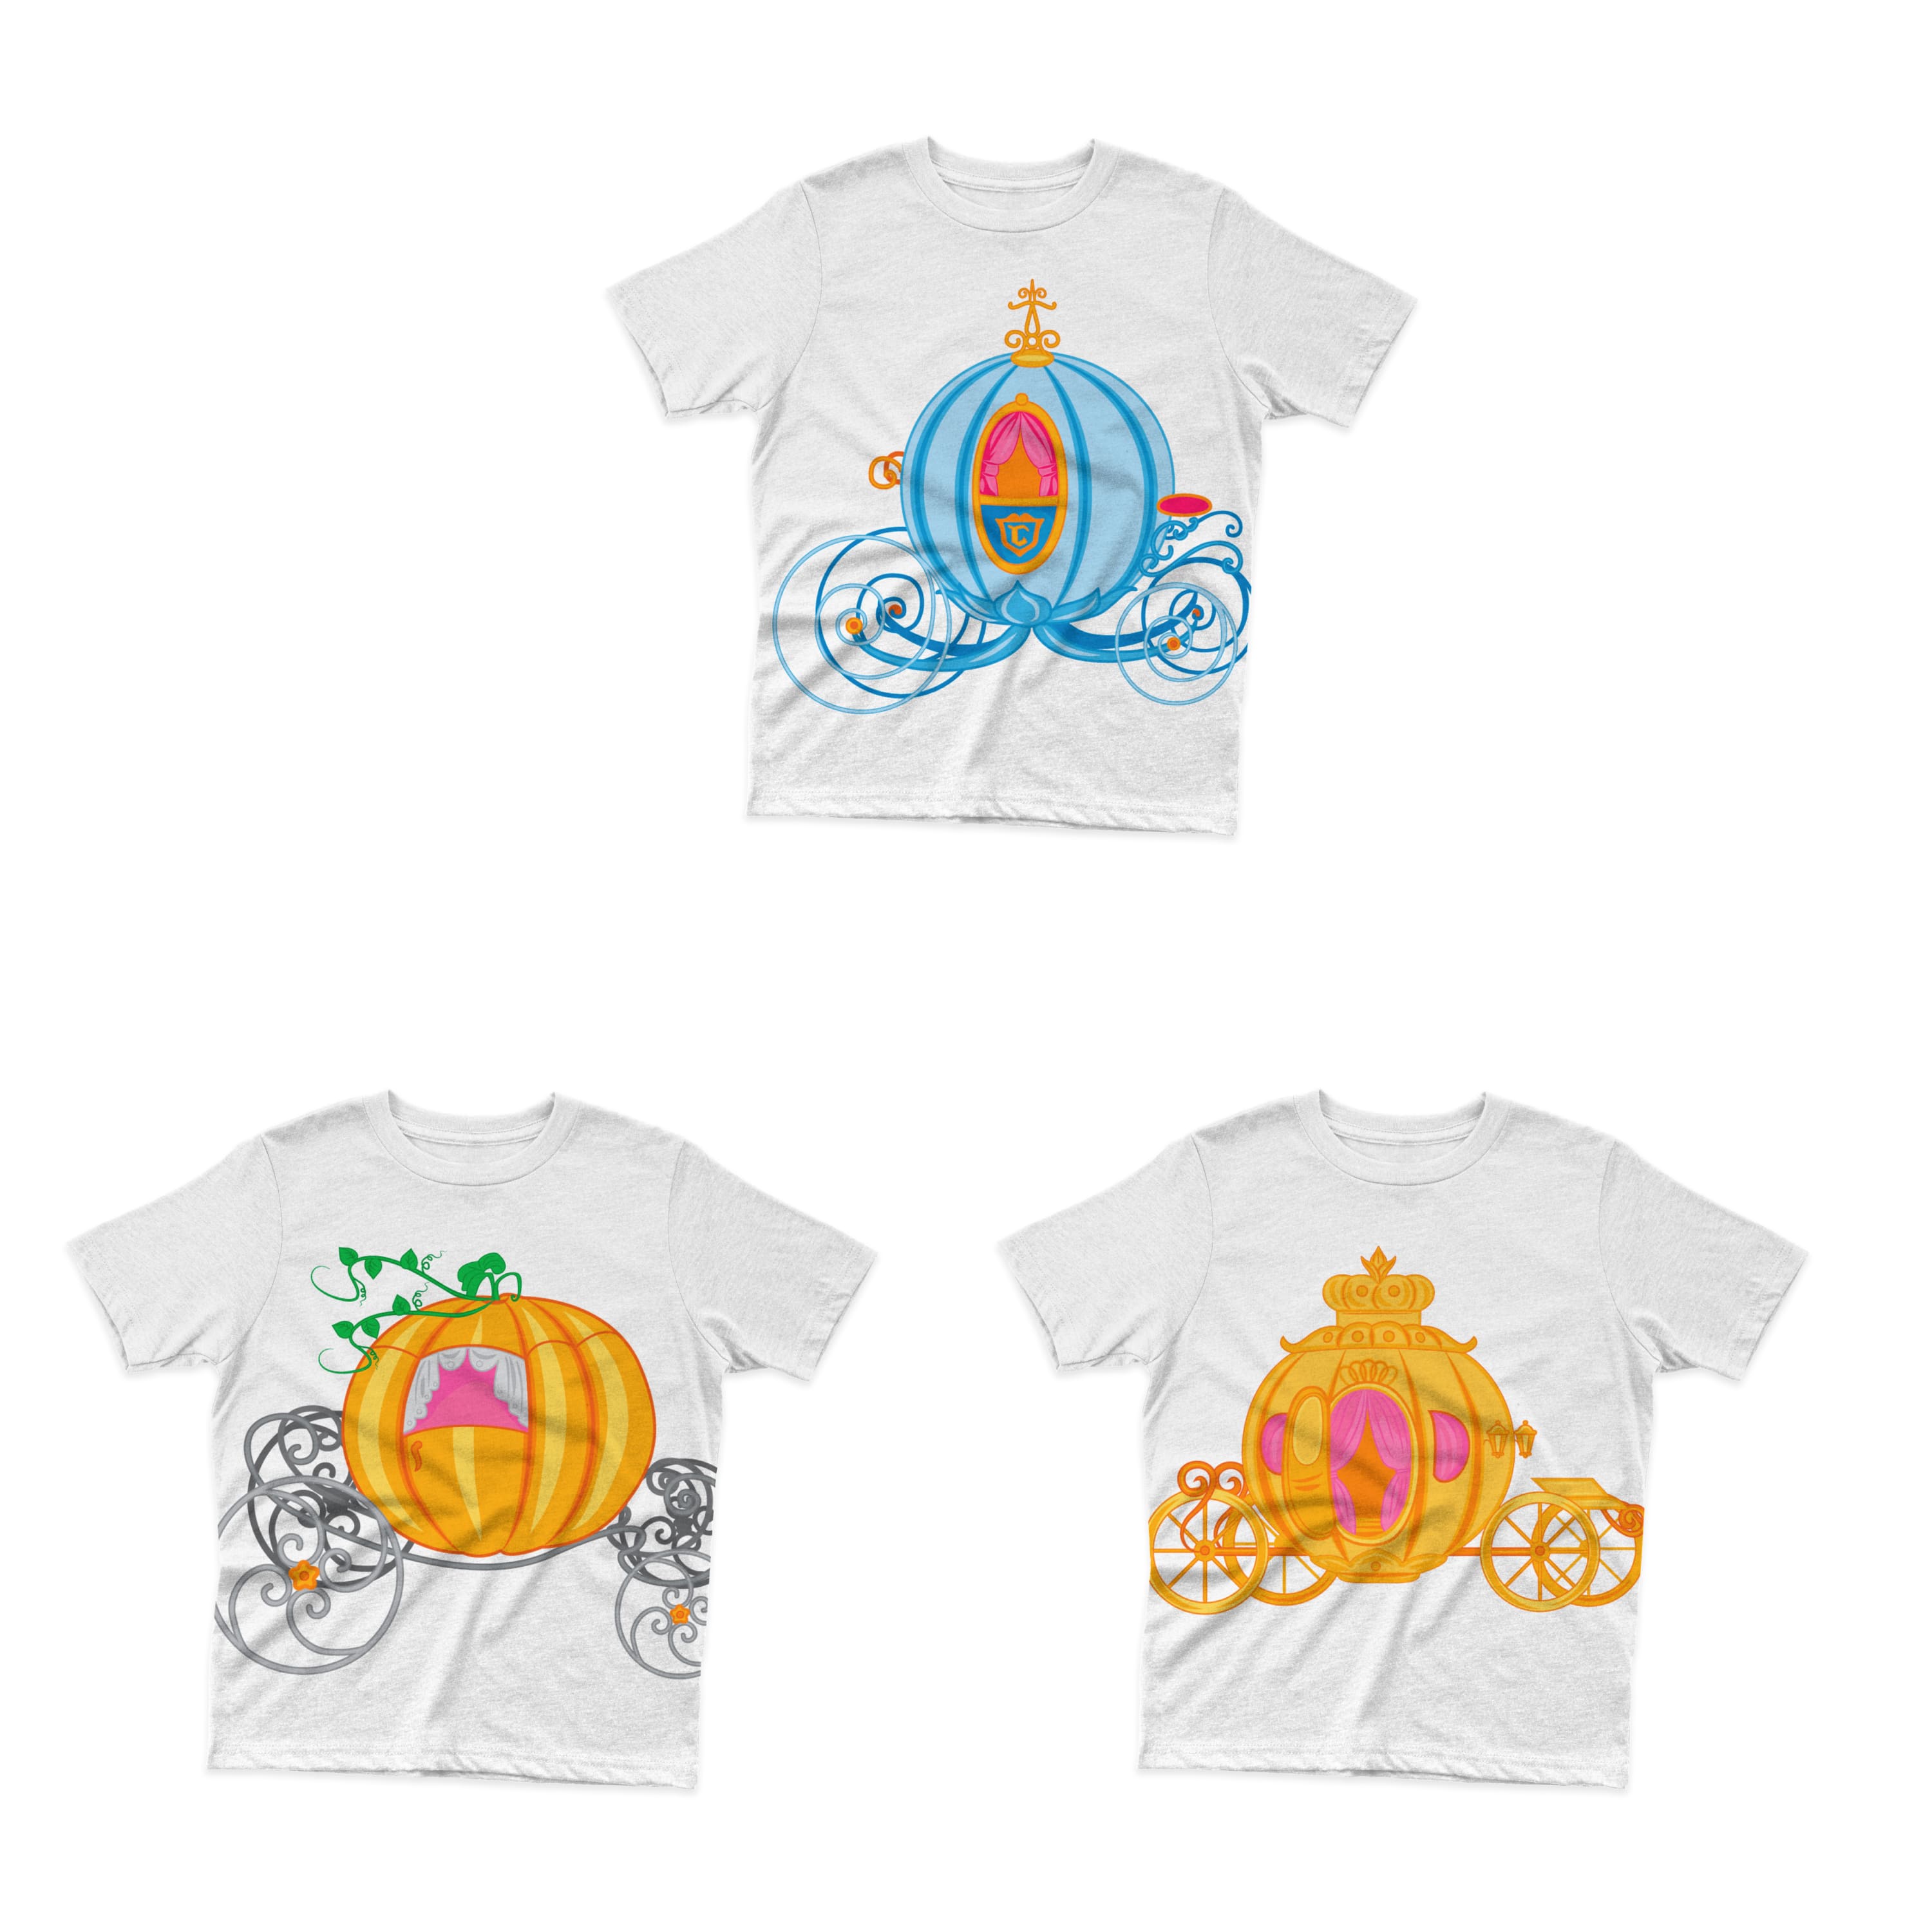 A pack of images of T-shirts with an enchanting print of Cinderella's carriage.